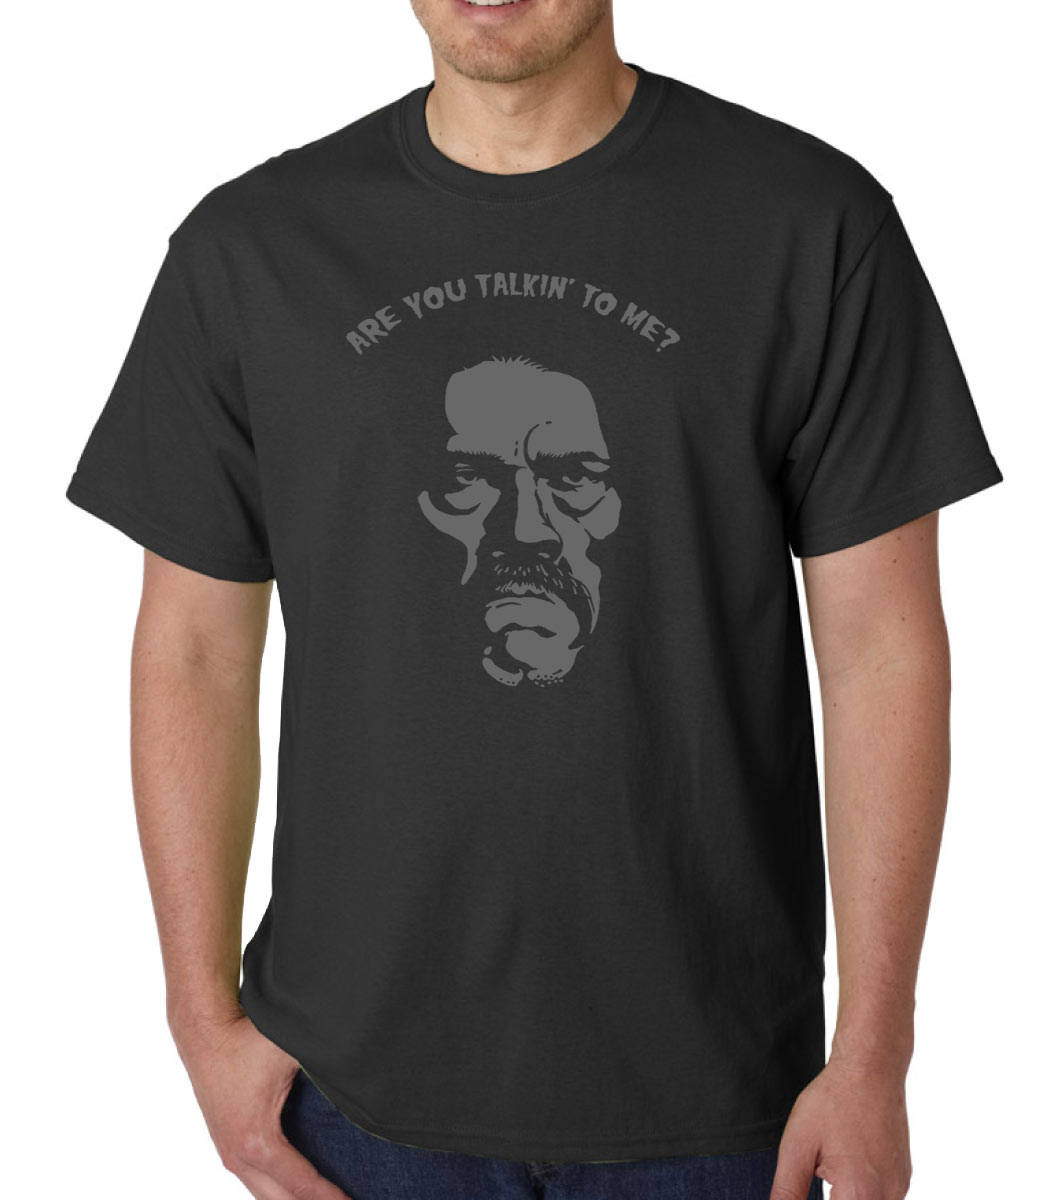 Are You Talkin To Me? (Danny Trejo) t-shirt